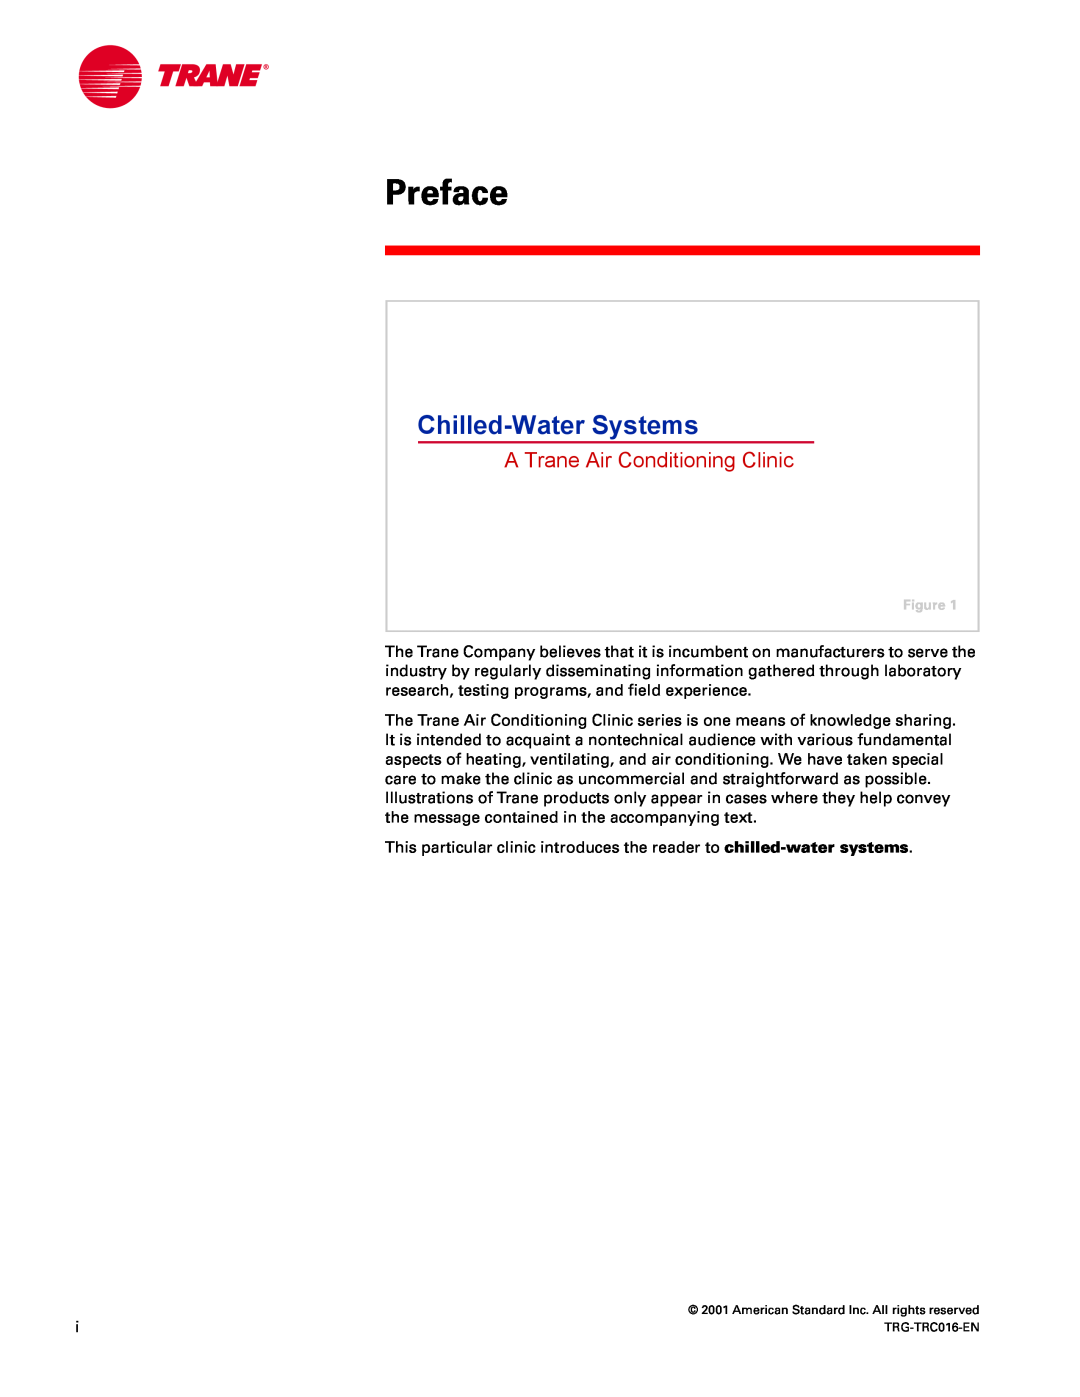 Trane TRG-TRC016-EN manual Preface, Chilled-WaterSystems, A Trane Air Conditioning Clinic 